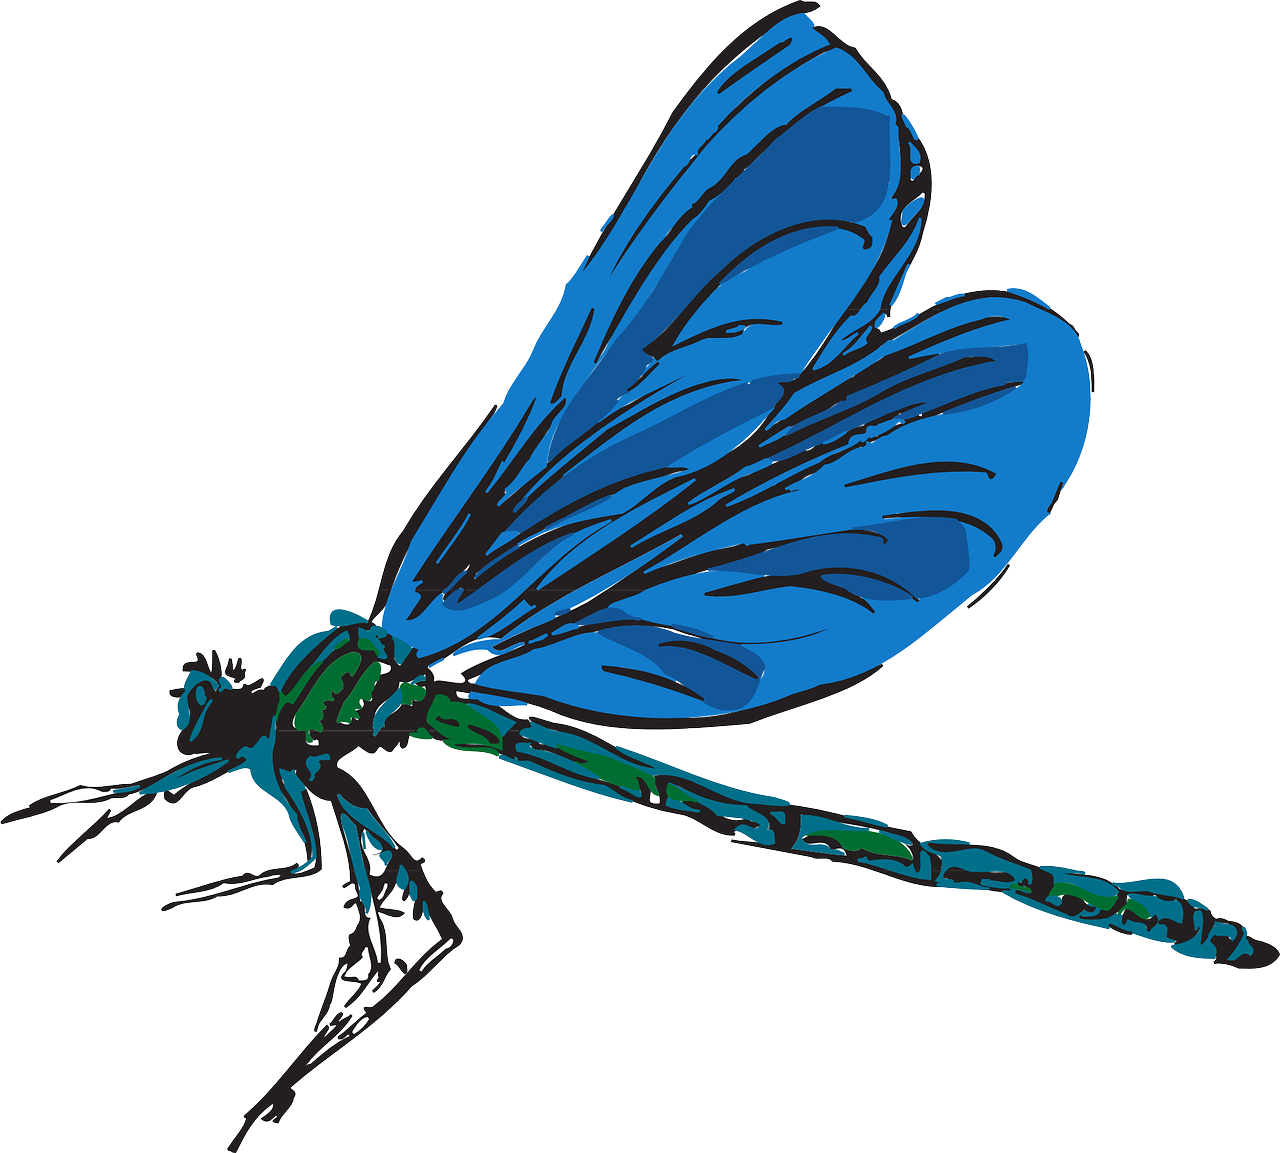 Dragonfly,flying,wings,insect,fly - free image from